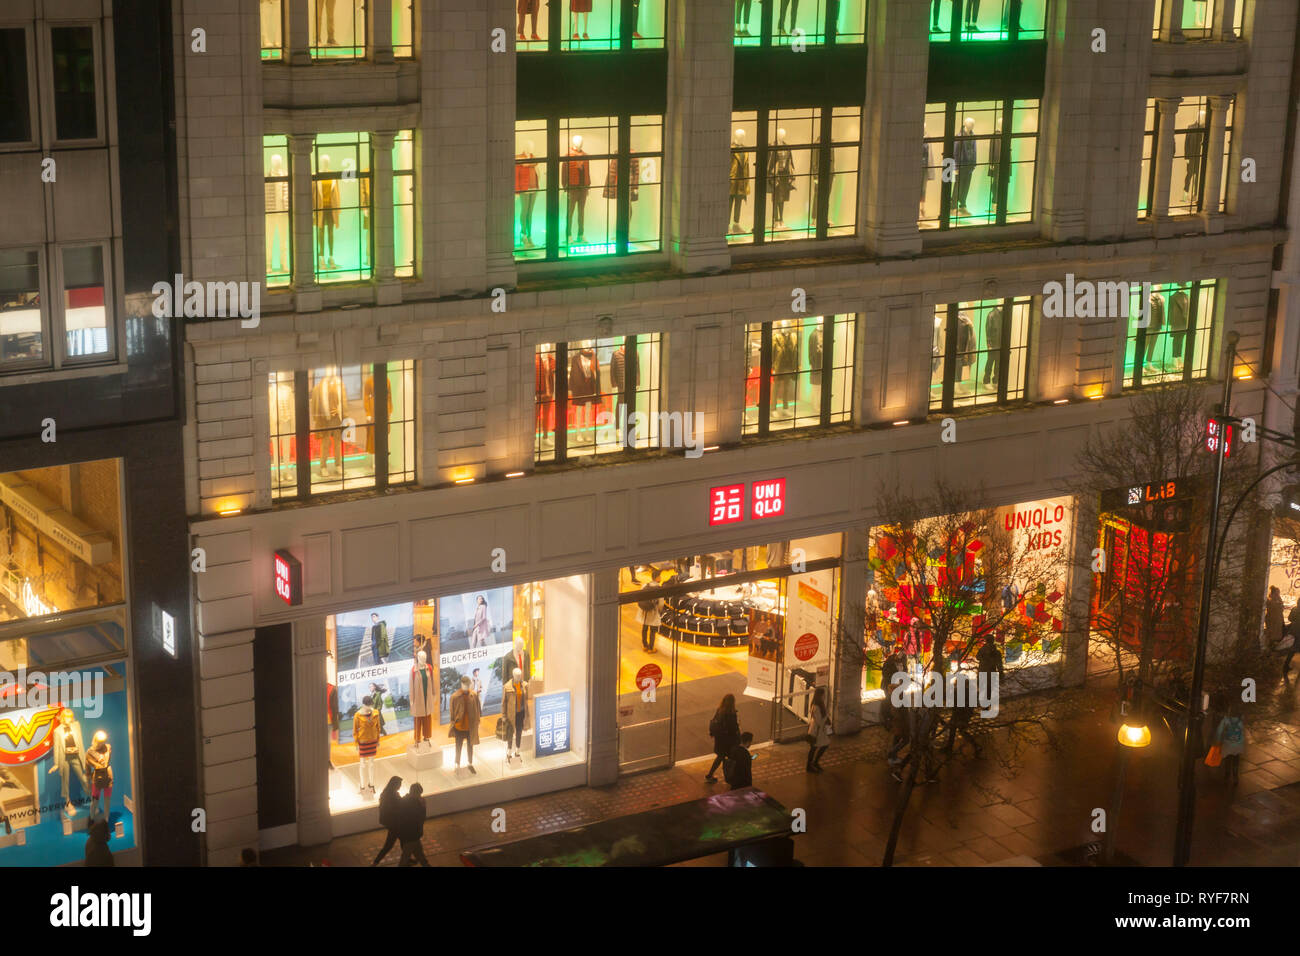 The outside of the Uniqlo clothing store on a rainy night in Oxford Street, London. Stock Photo